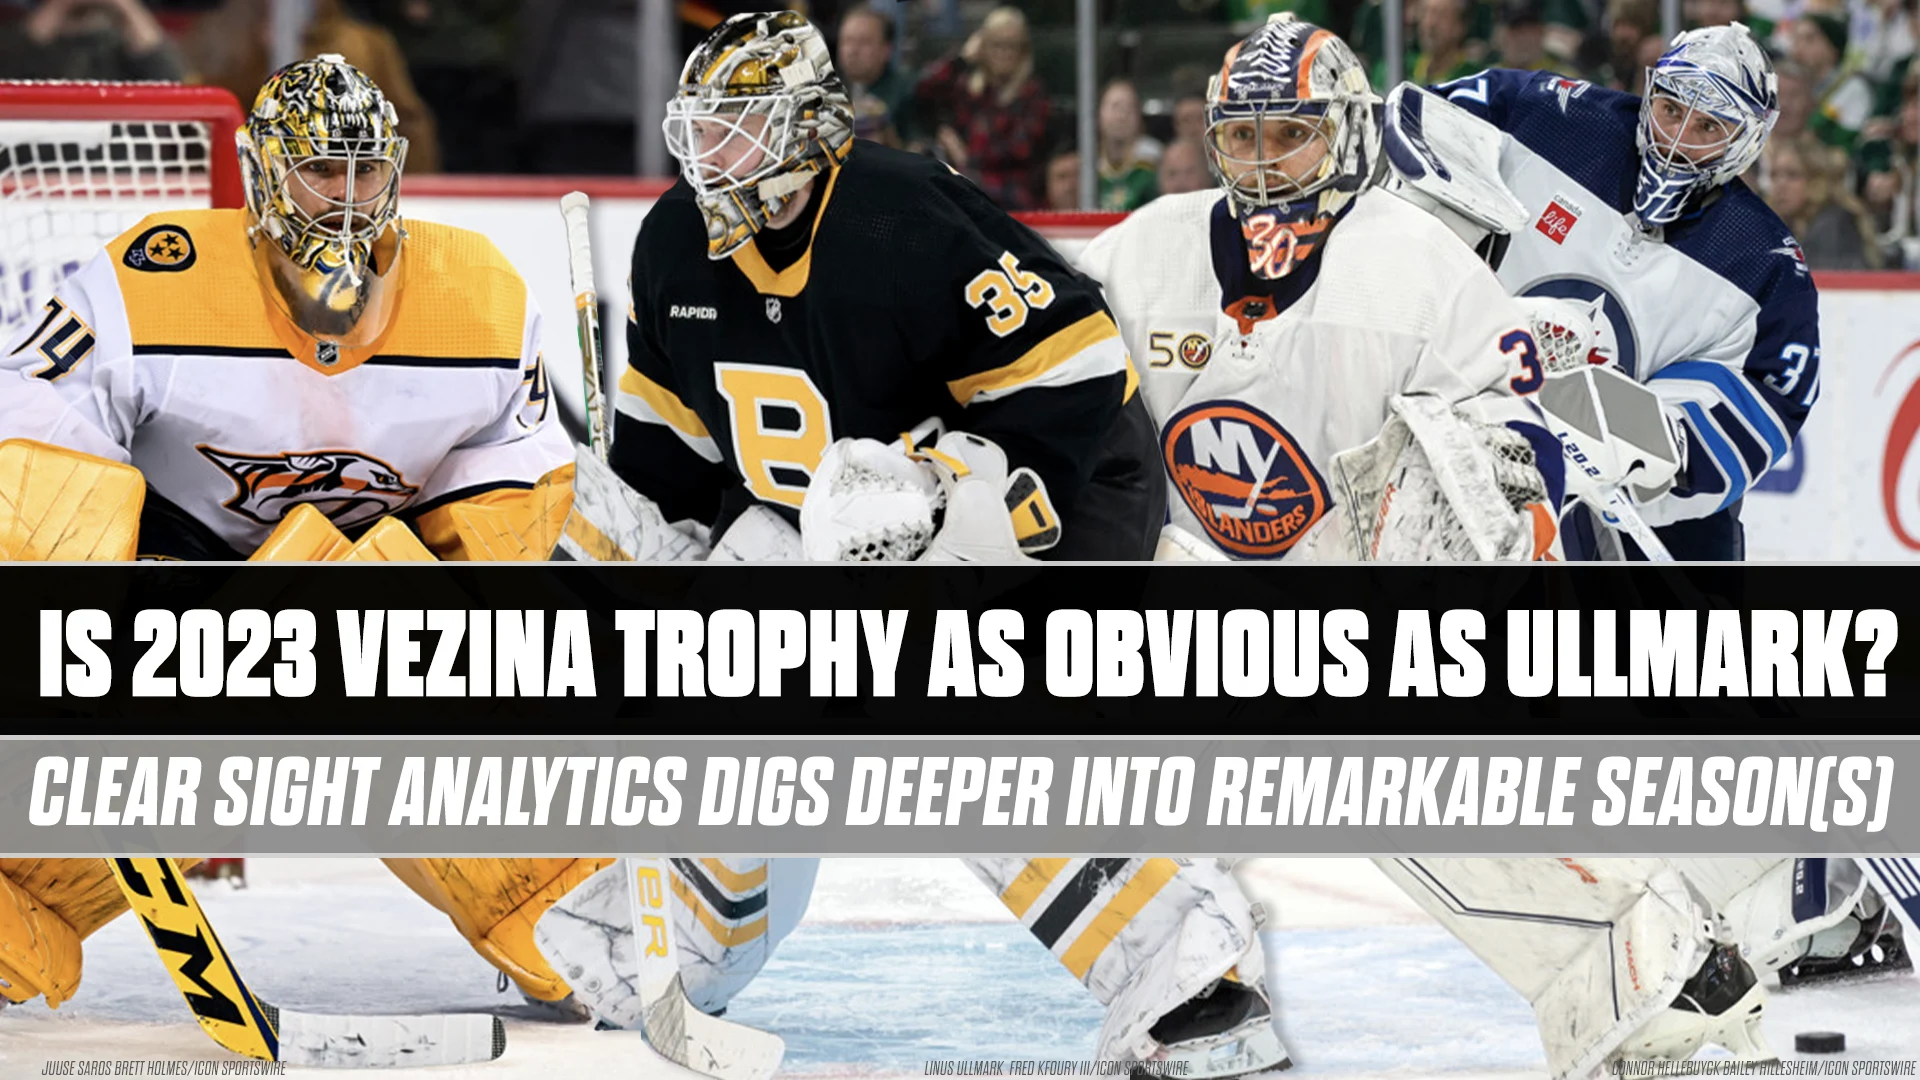 Is 2023 Vezina Trophy as Obvious as Ullmark?